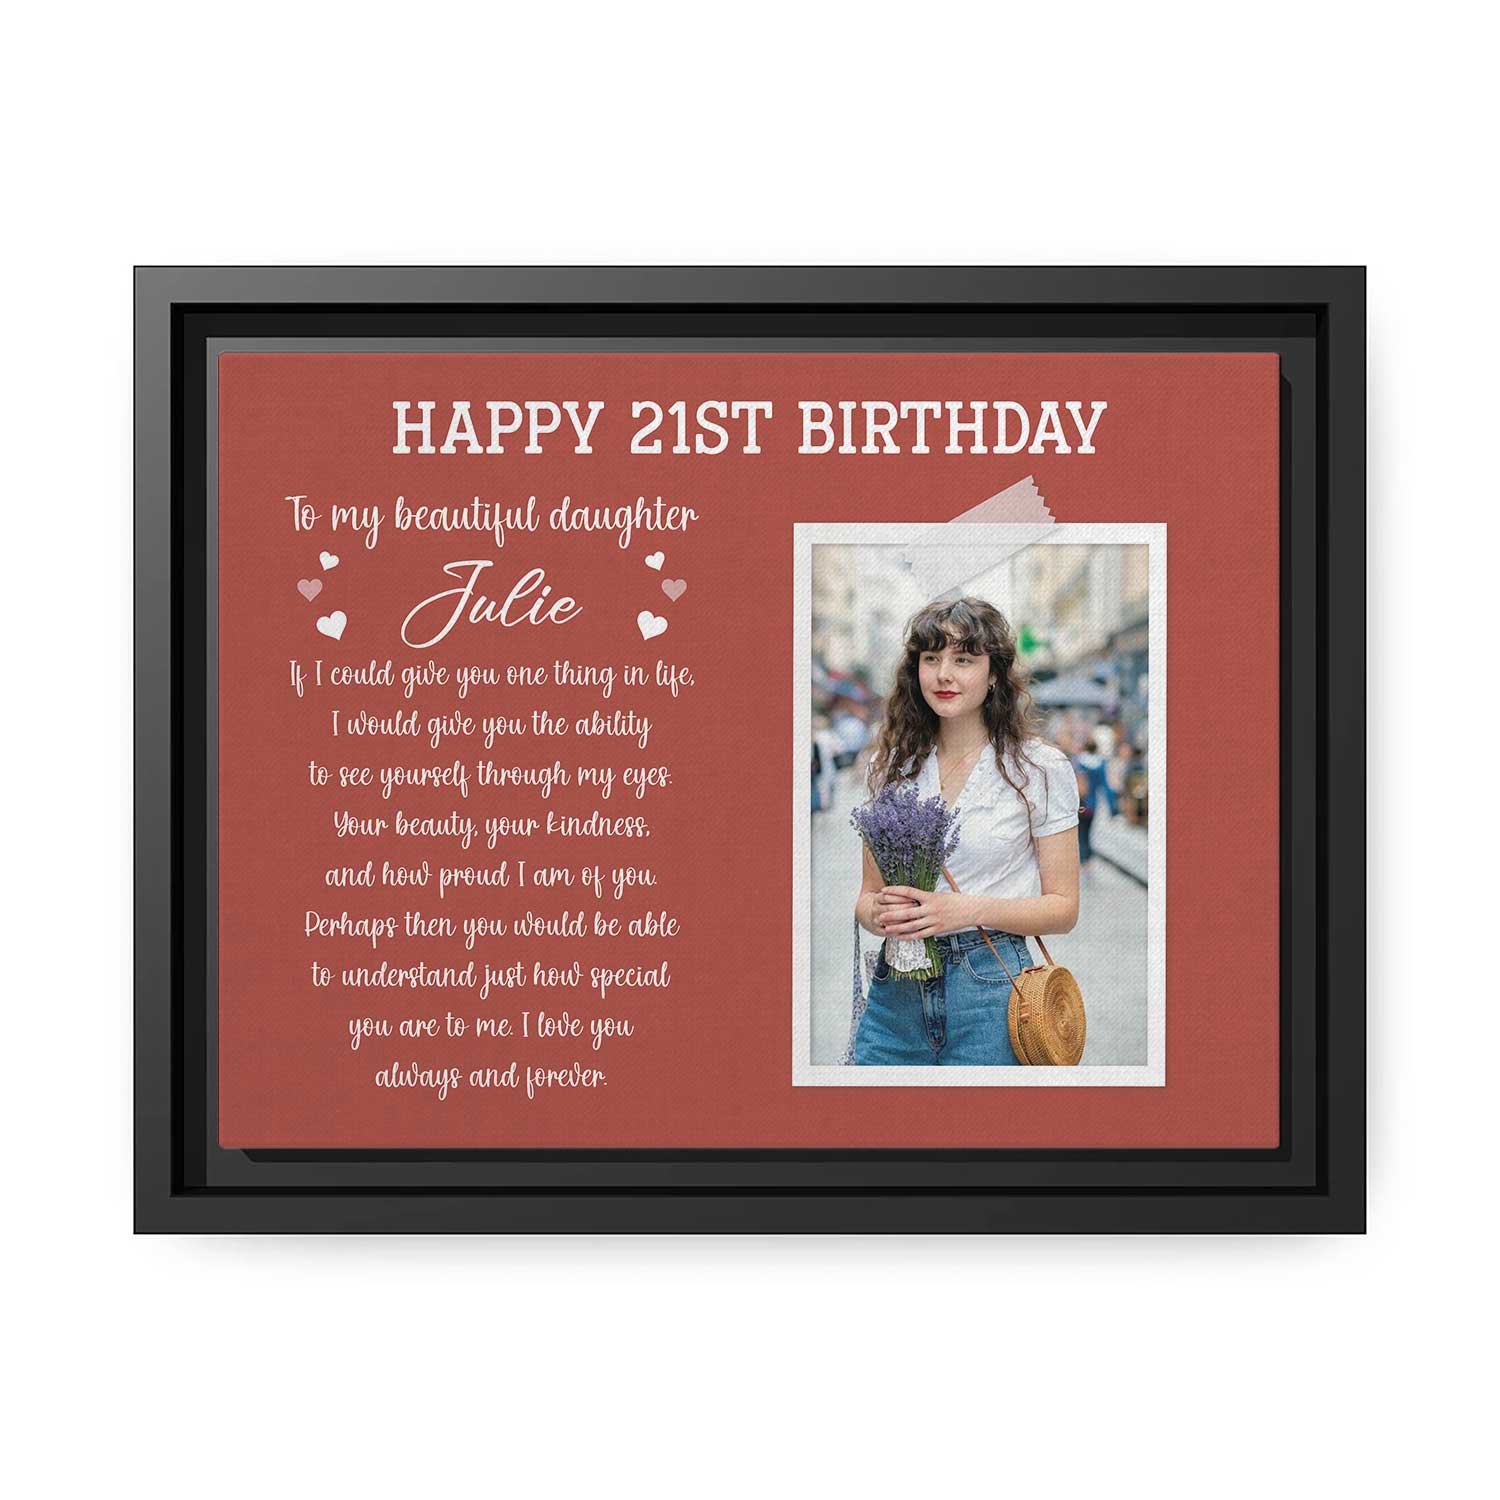 Happy 21st Birthday - Personalized 21st Birthday gift For Daughter - Custom Canvas Print - MyMindfulGifts